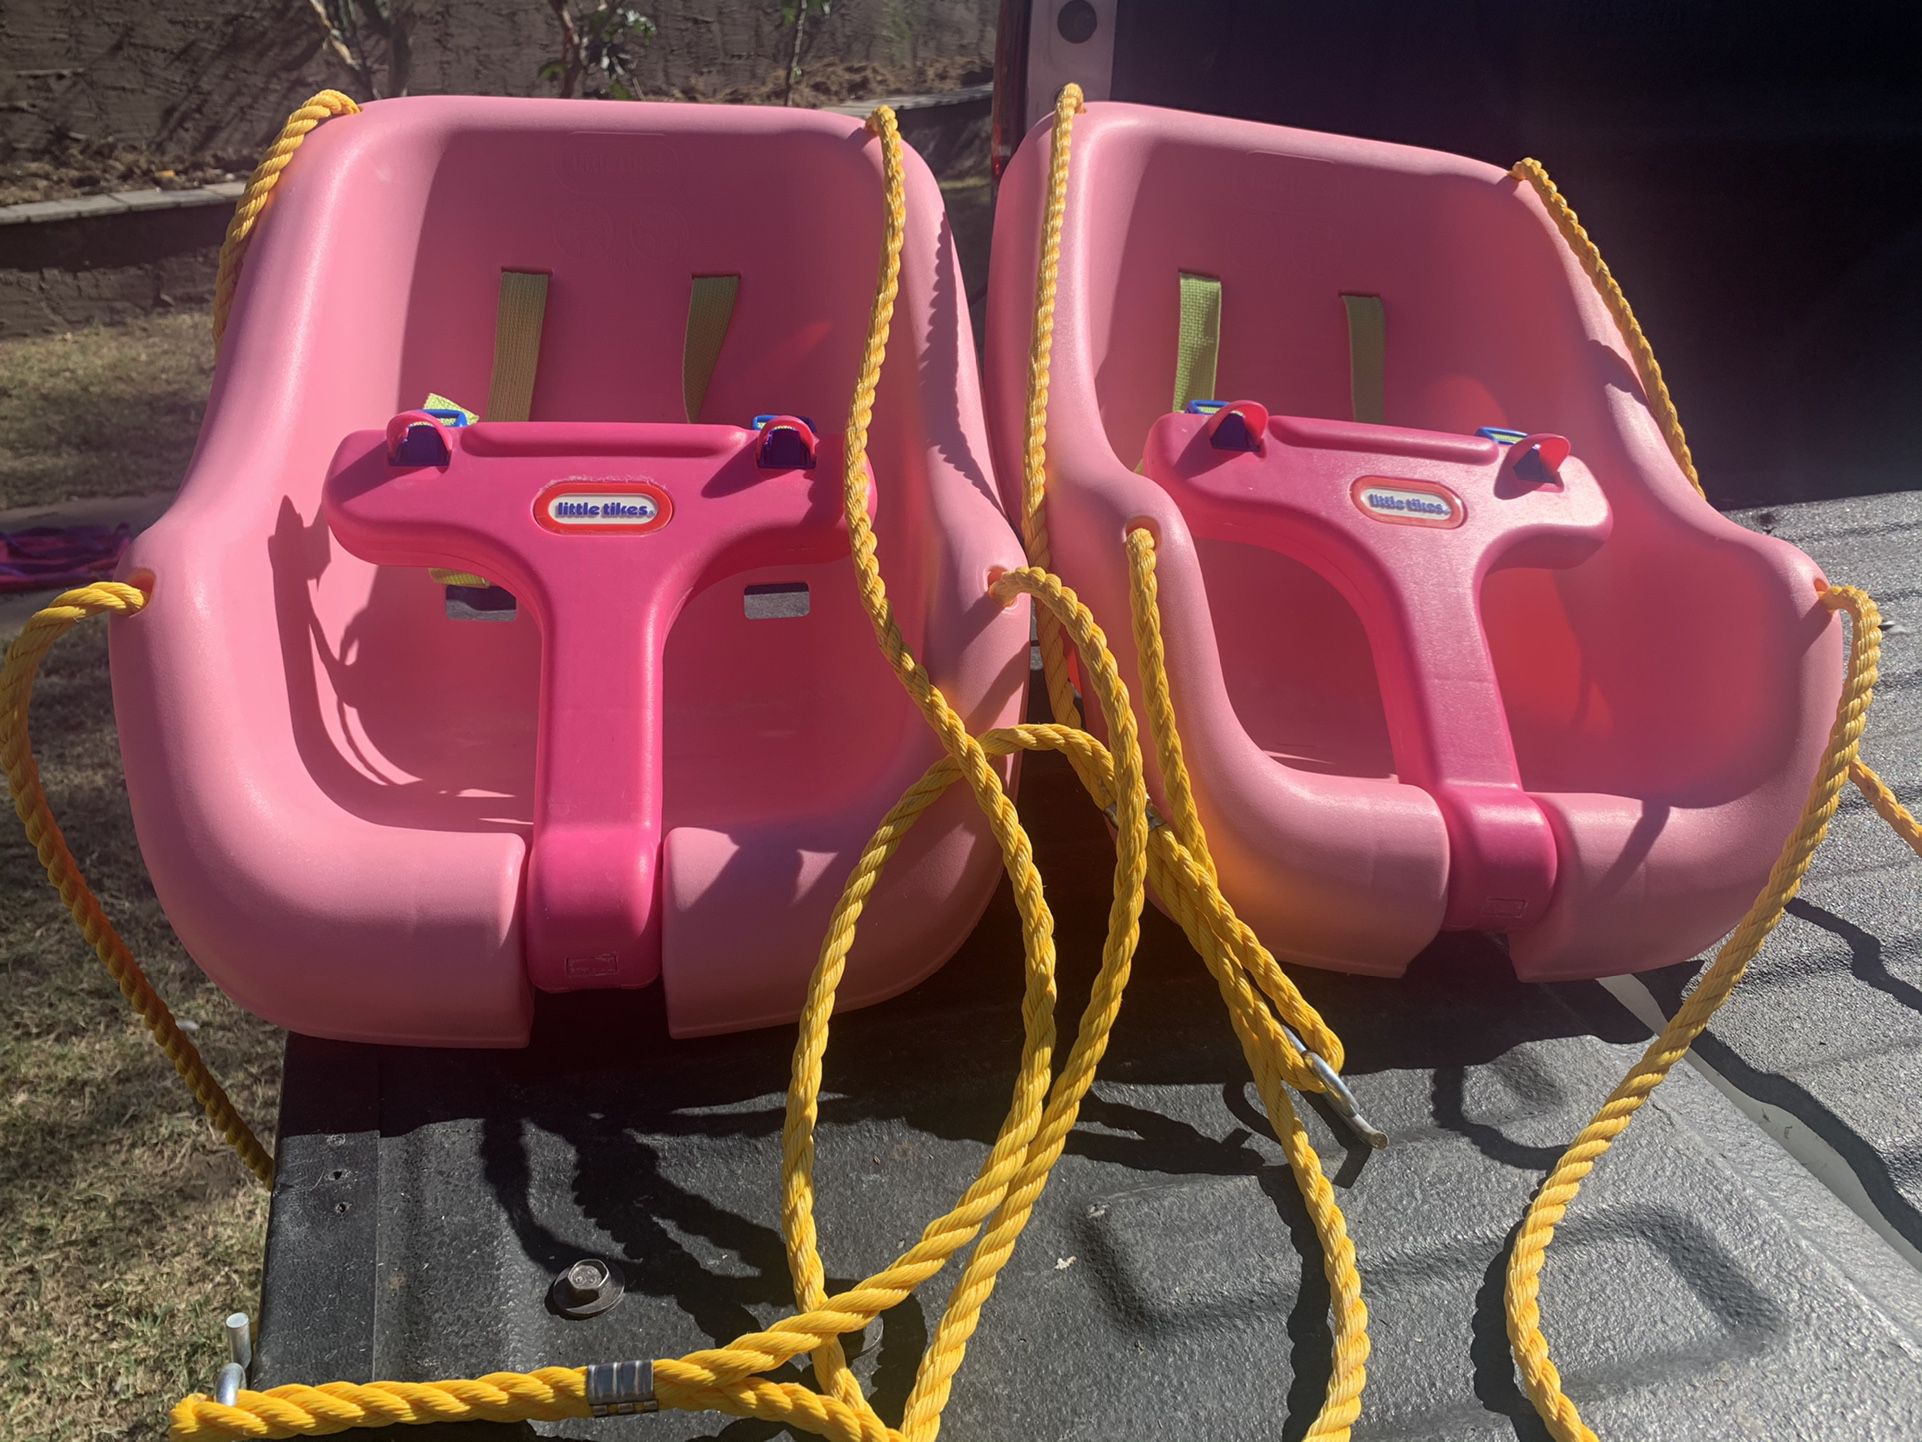 Little tikes swings $10 each or $20 for both